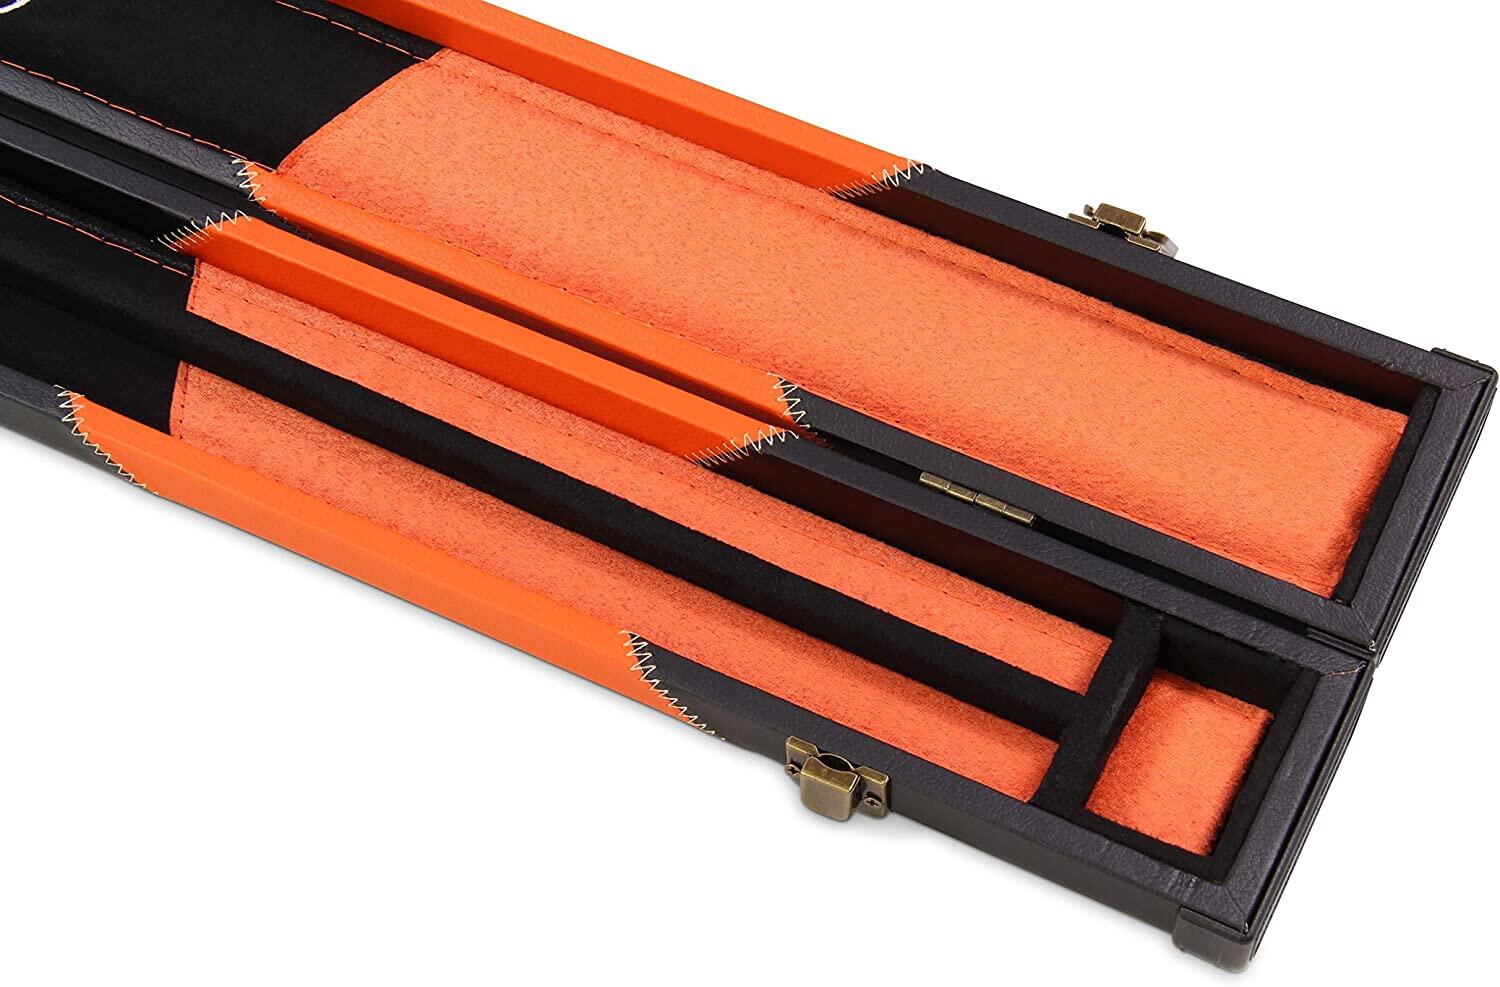 Baize Master ORANGE ARROW 2pc Deluxe Snooker Pool Cue Case with Matching Interi 6/7